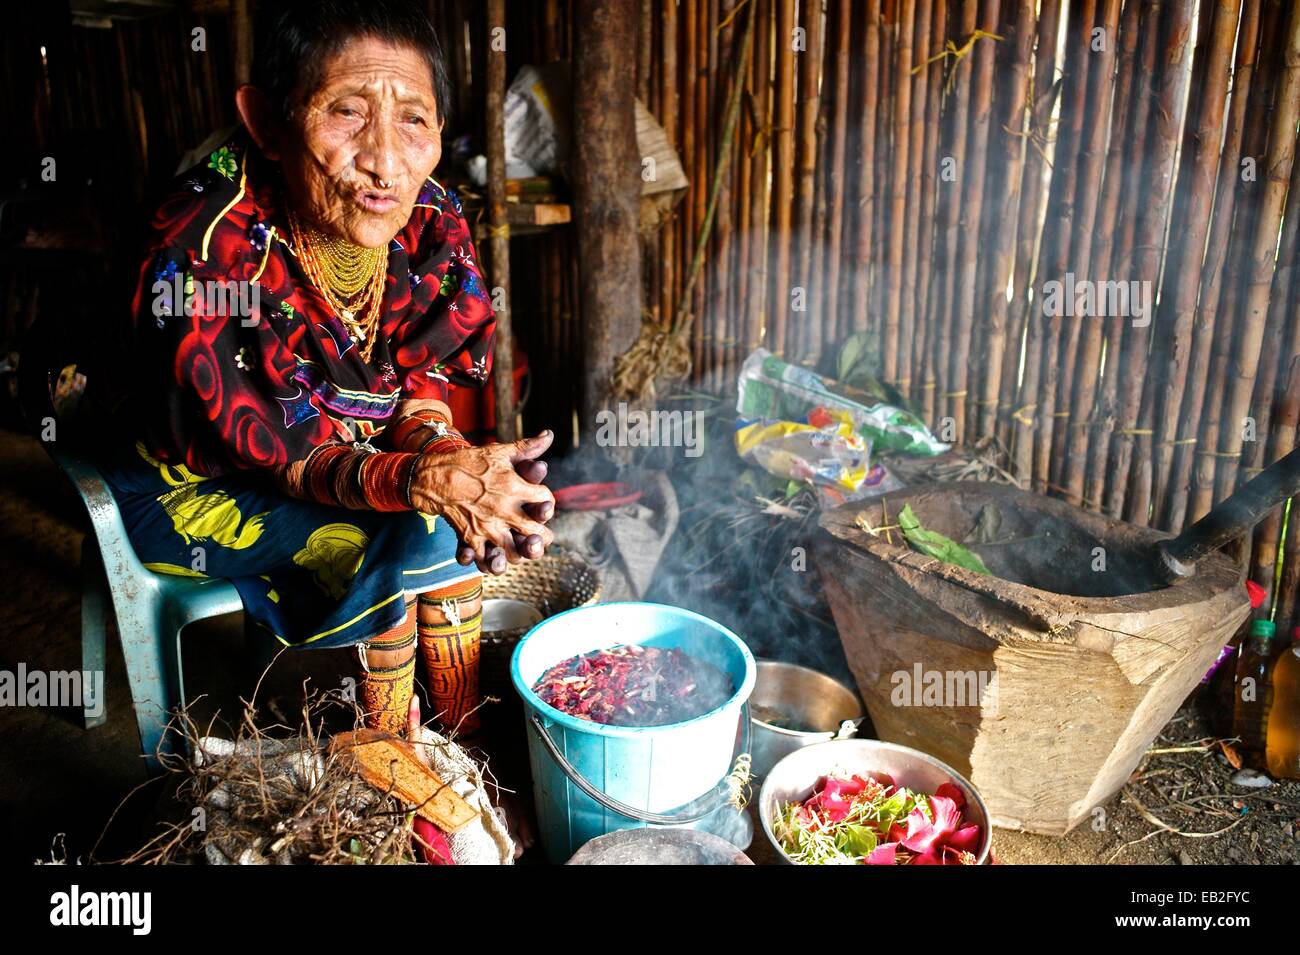 Ninety years old Cuna midwife crunches natural ingredients using a pestle and a mortar to produce traditional medicines. Stock Photo